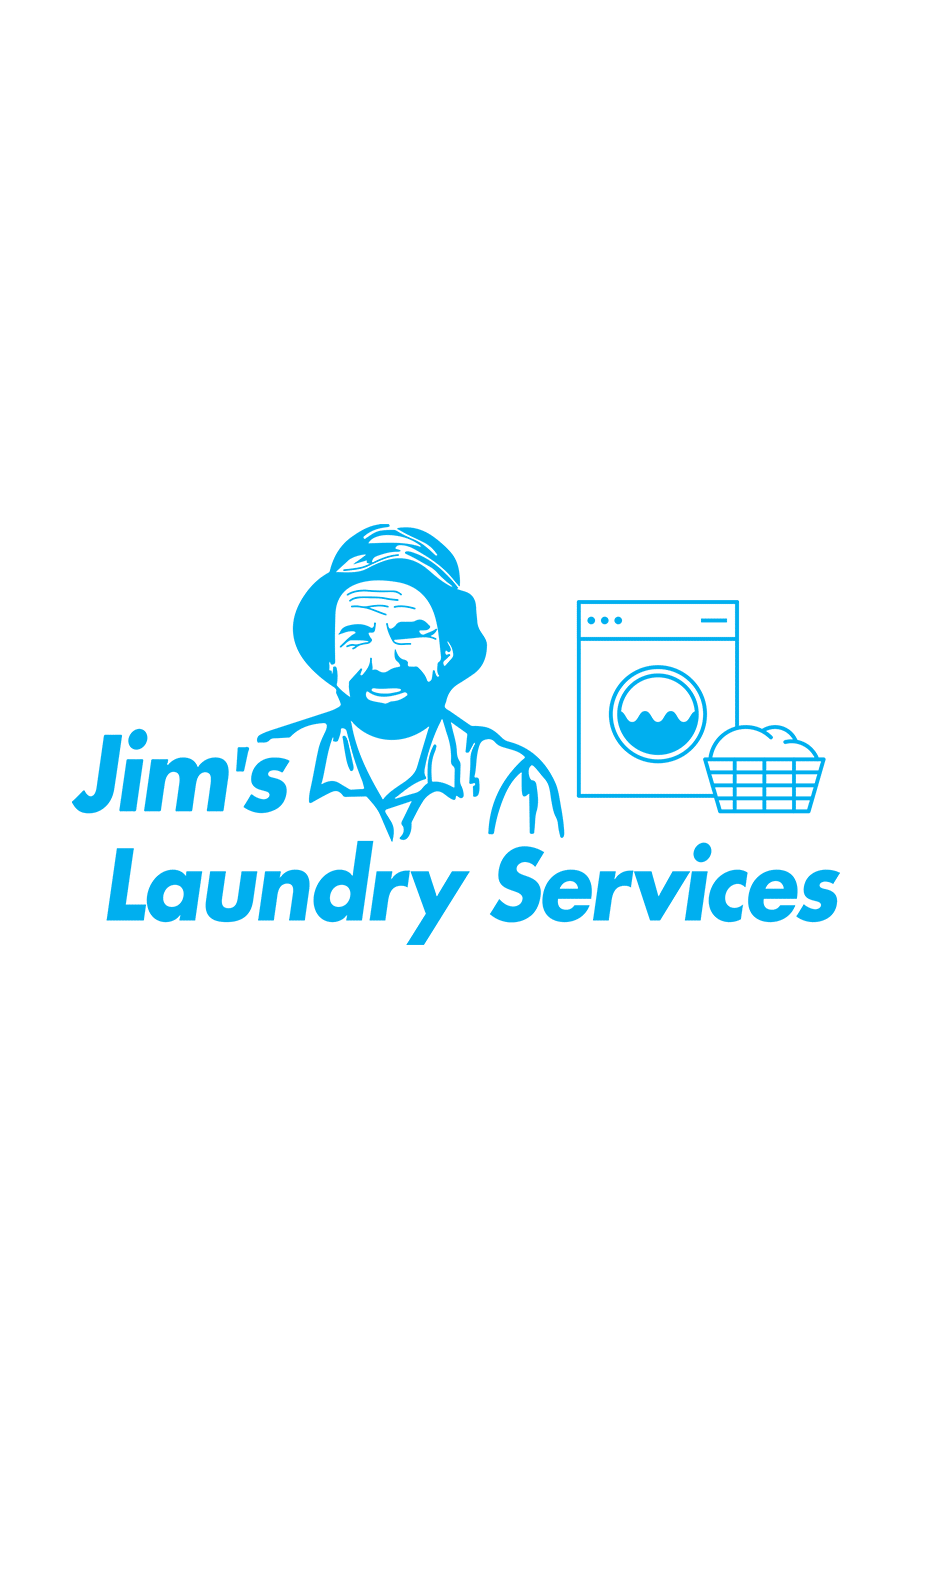 image of Jim's Laundry Services